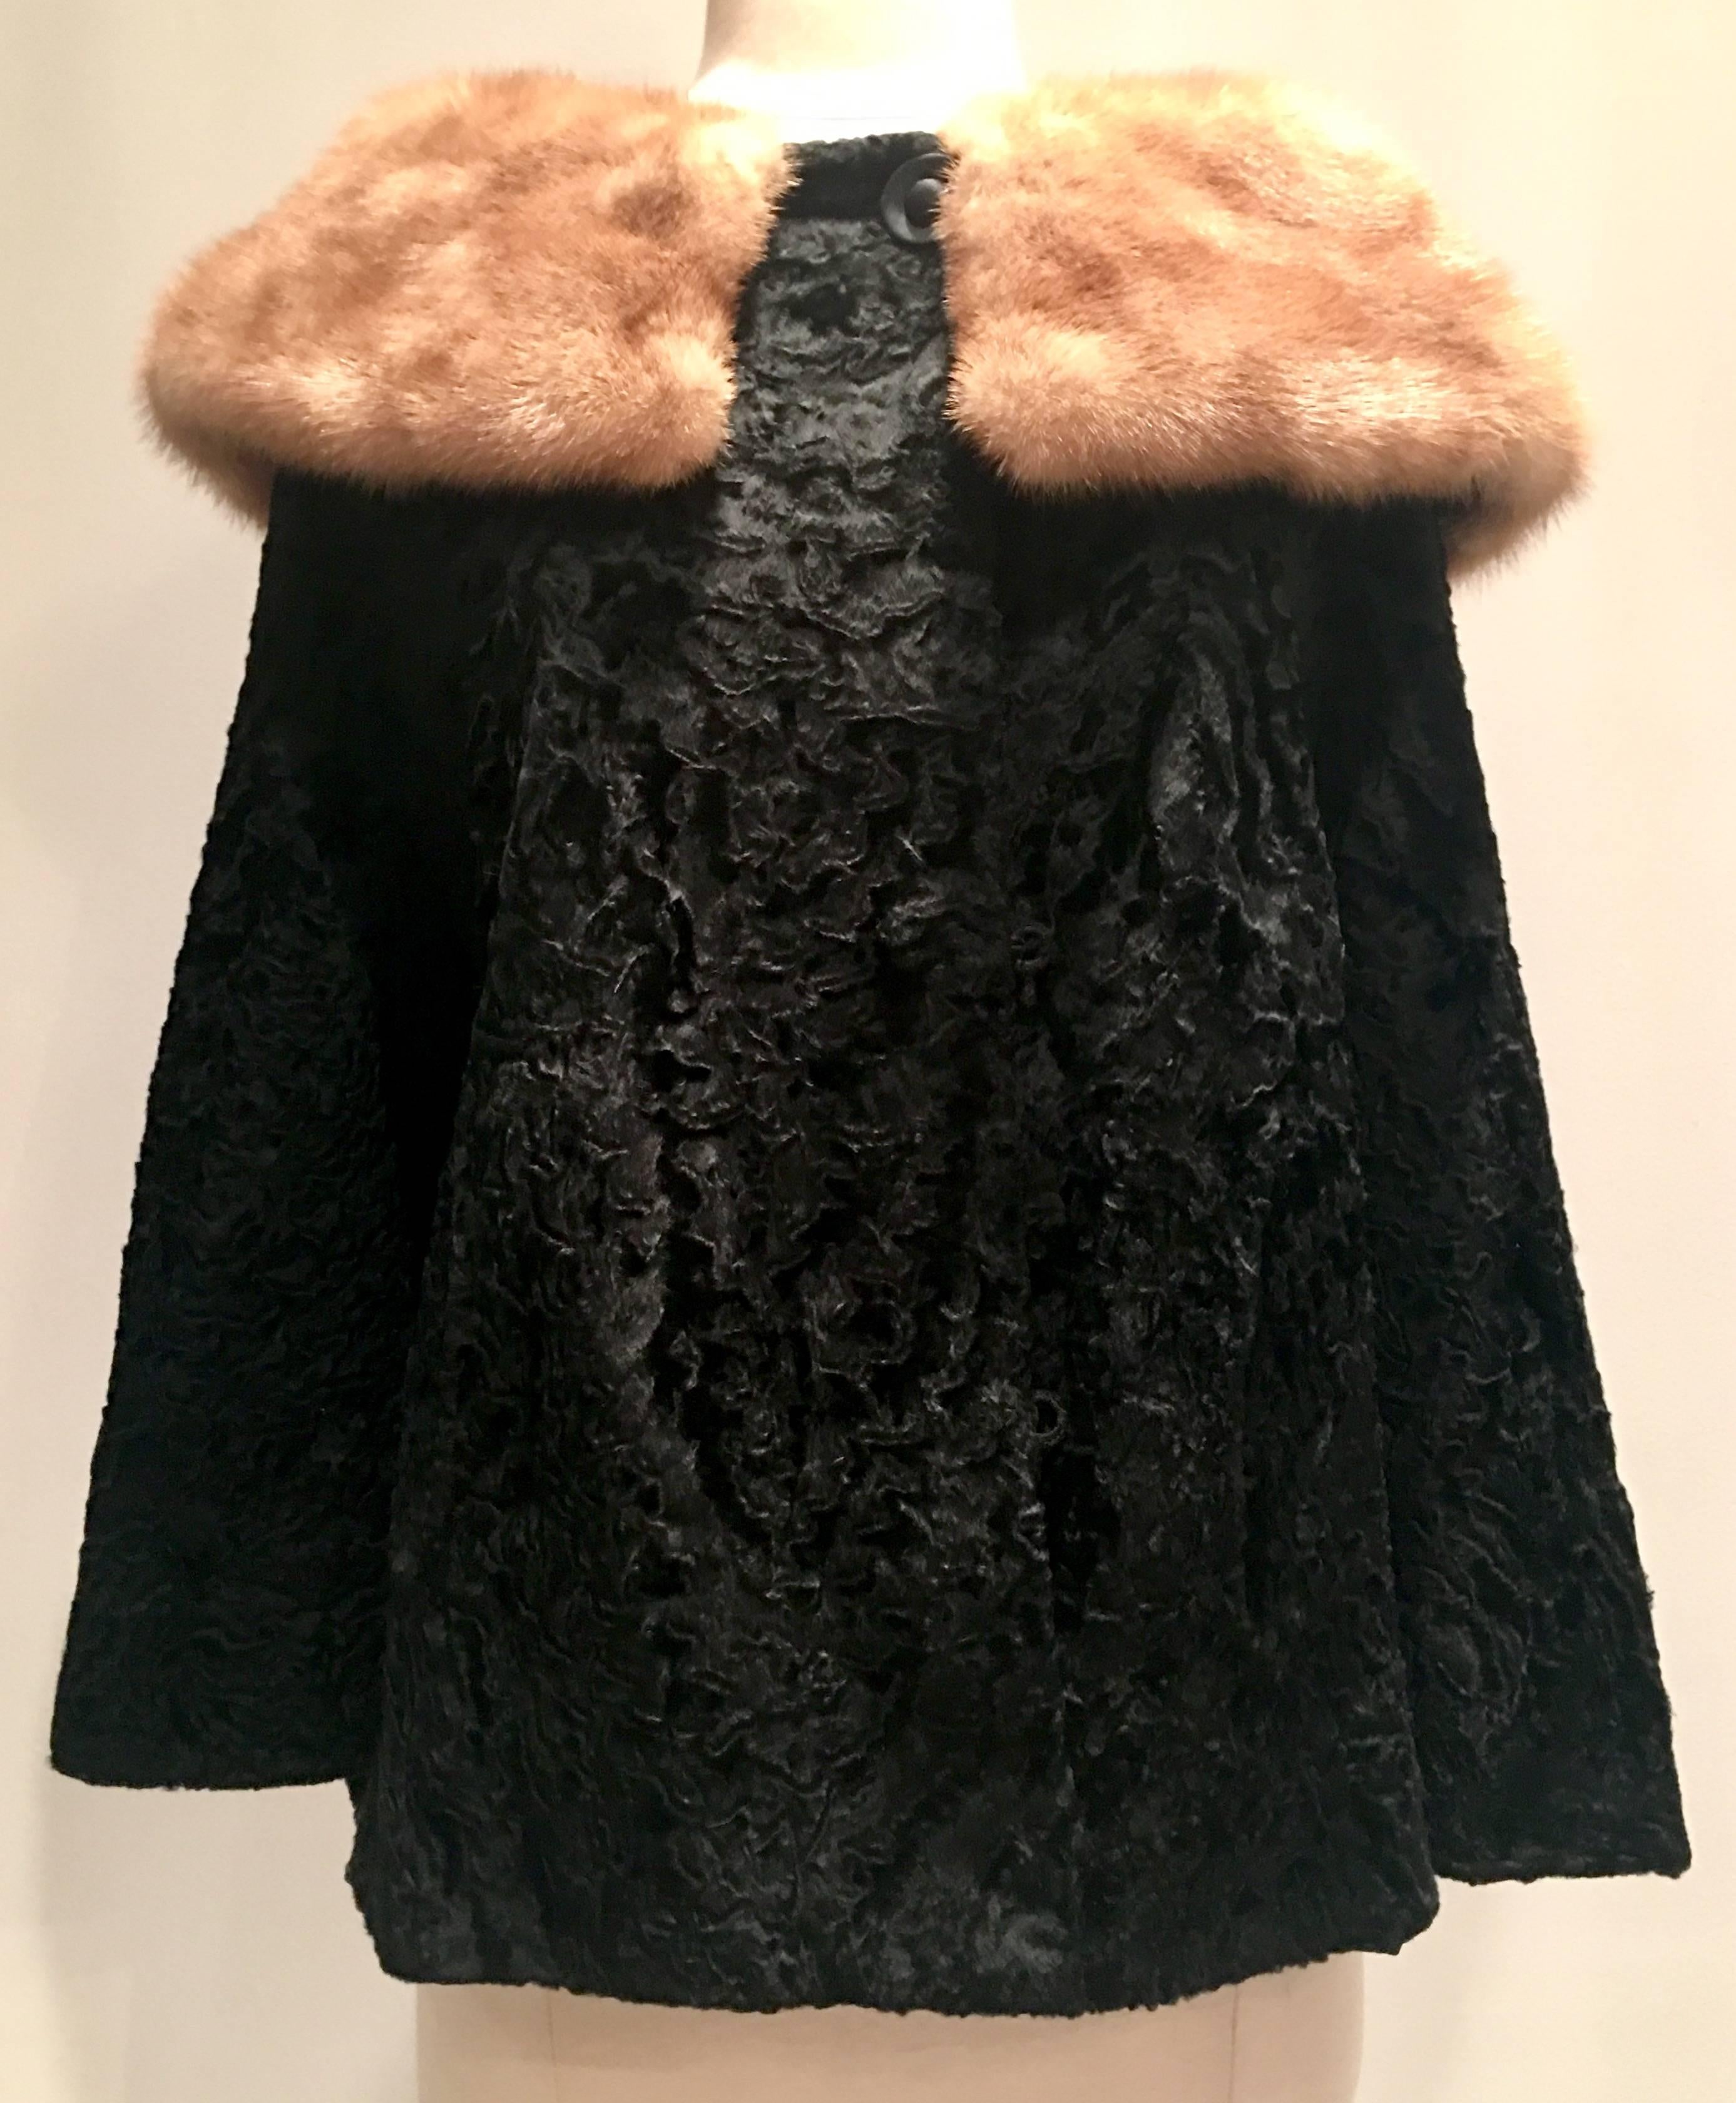 Gorgeous jet black Persian lamb and honey mink peter pan collar fur swing jacket with 3/4 inch bell sleeves. Features hidden satin wrapped buttons. There are two buttons at the collar, one at the neck and two at the front bodice. There are two